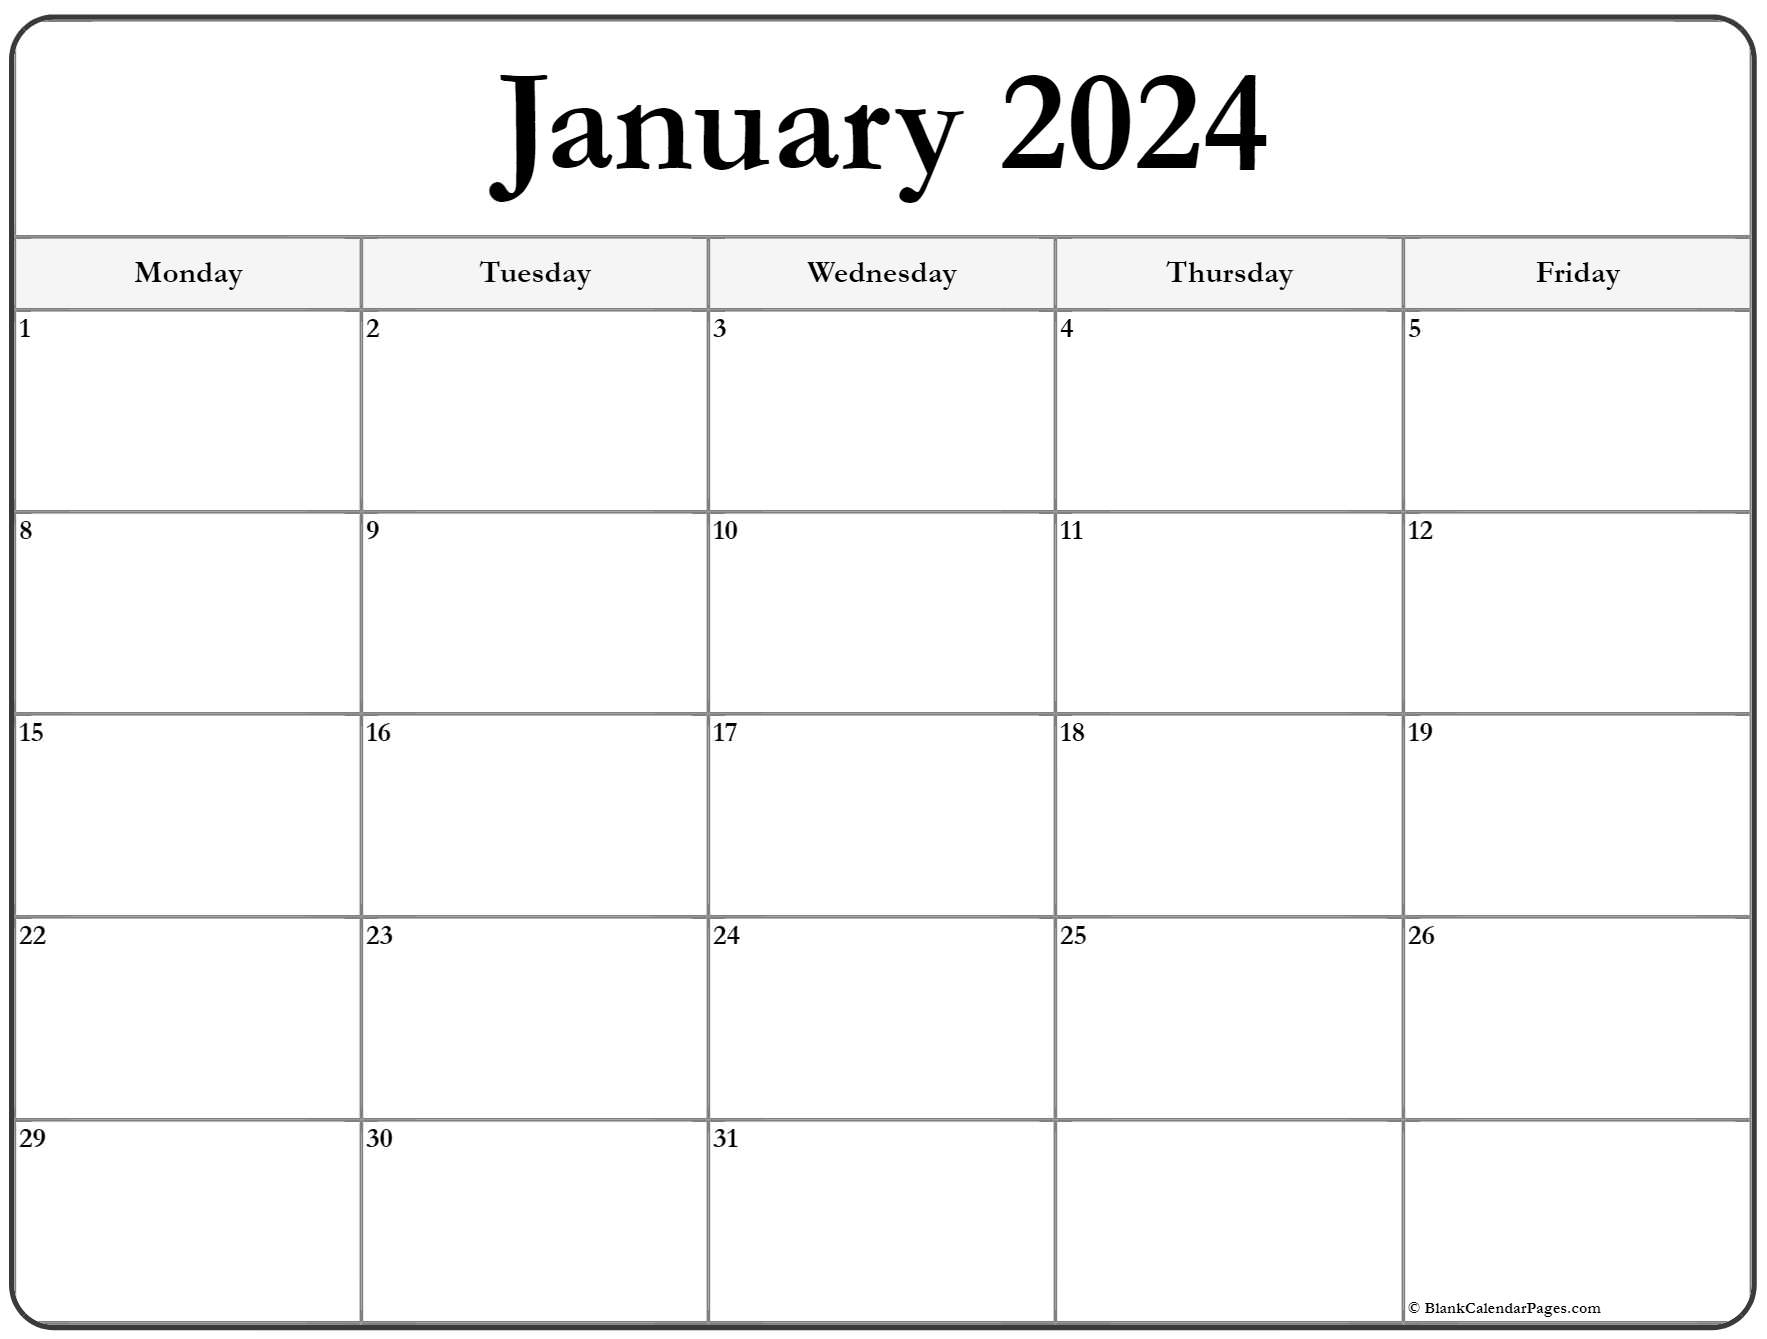 2024 Yearly Calendar Templates With Monday Start Free Printable 2024 - Free Printable 2024 Monday Start Calendar